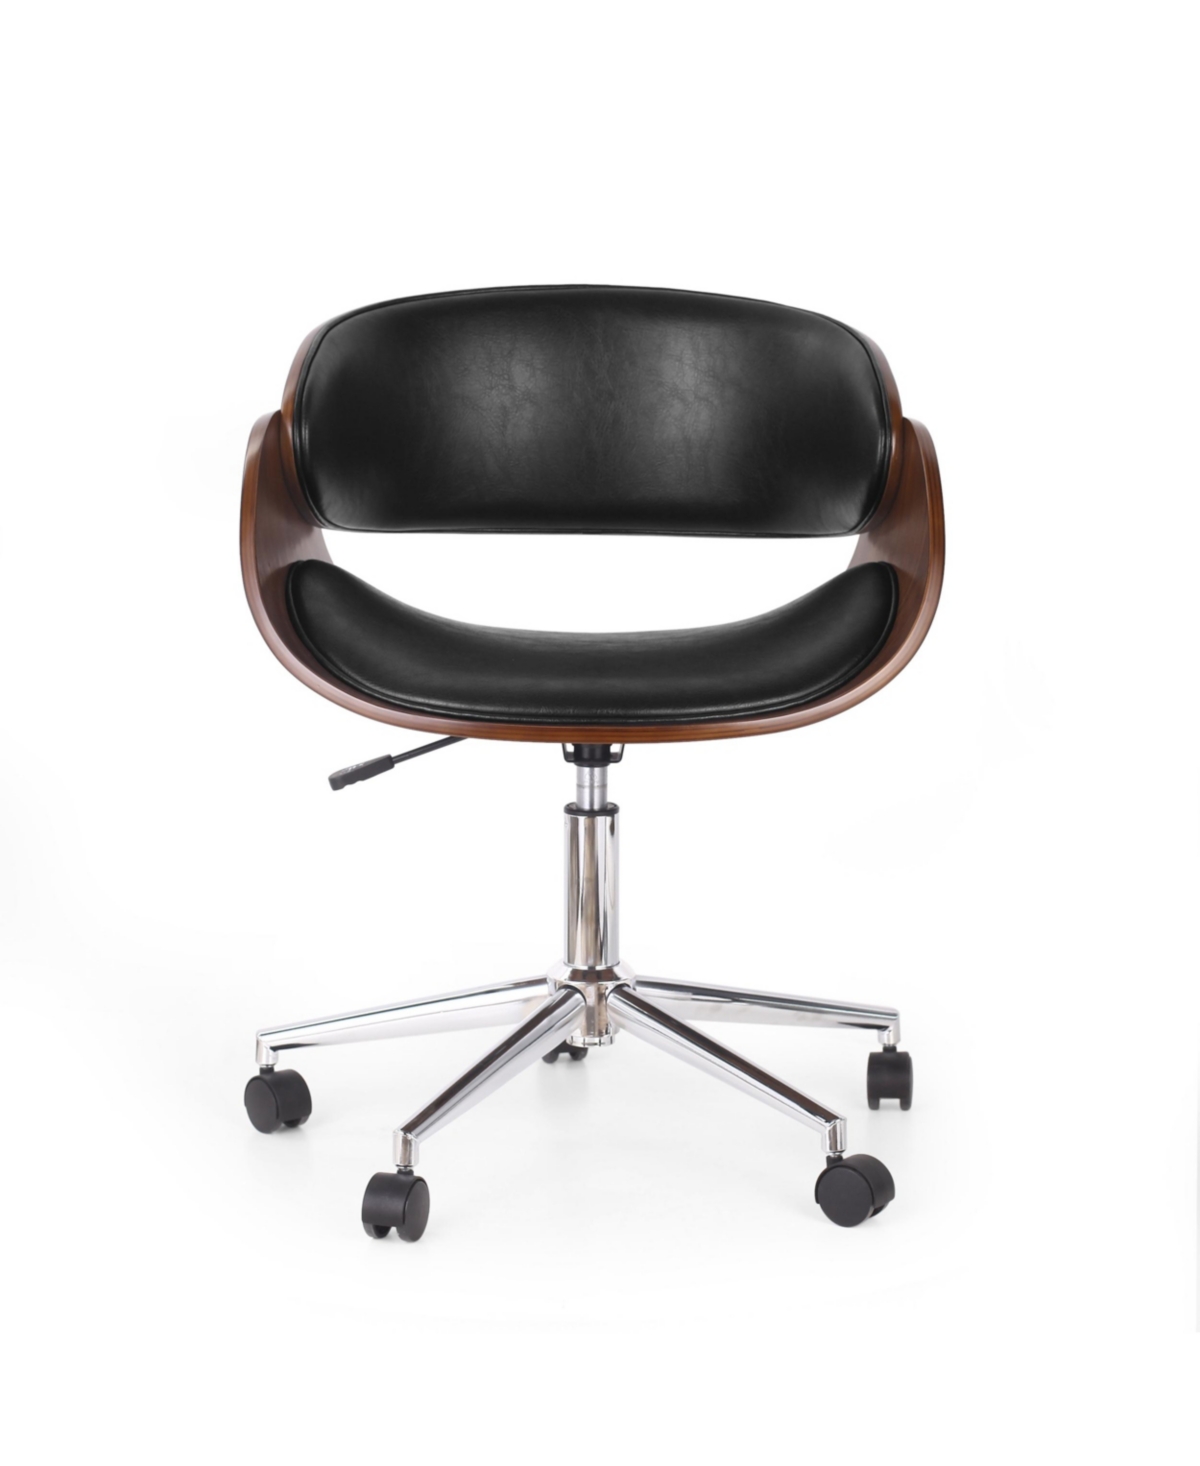 Noble House Brinson Mid-century Modern Upholstered Swivel Office Chair In Black